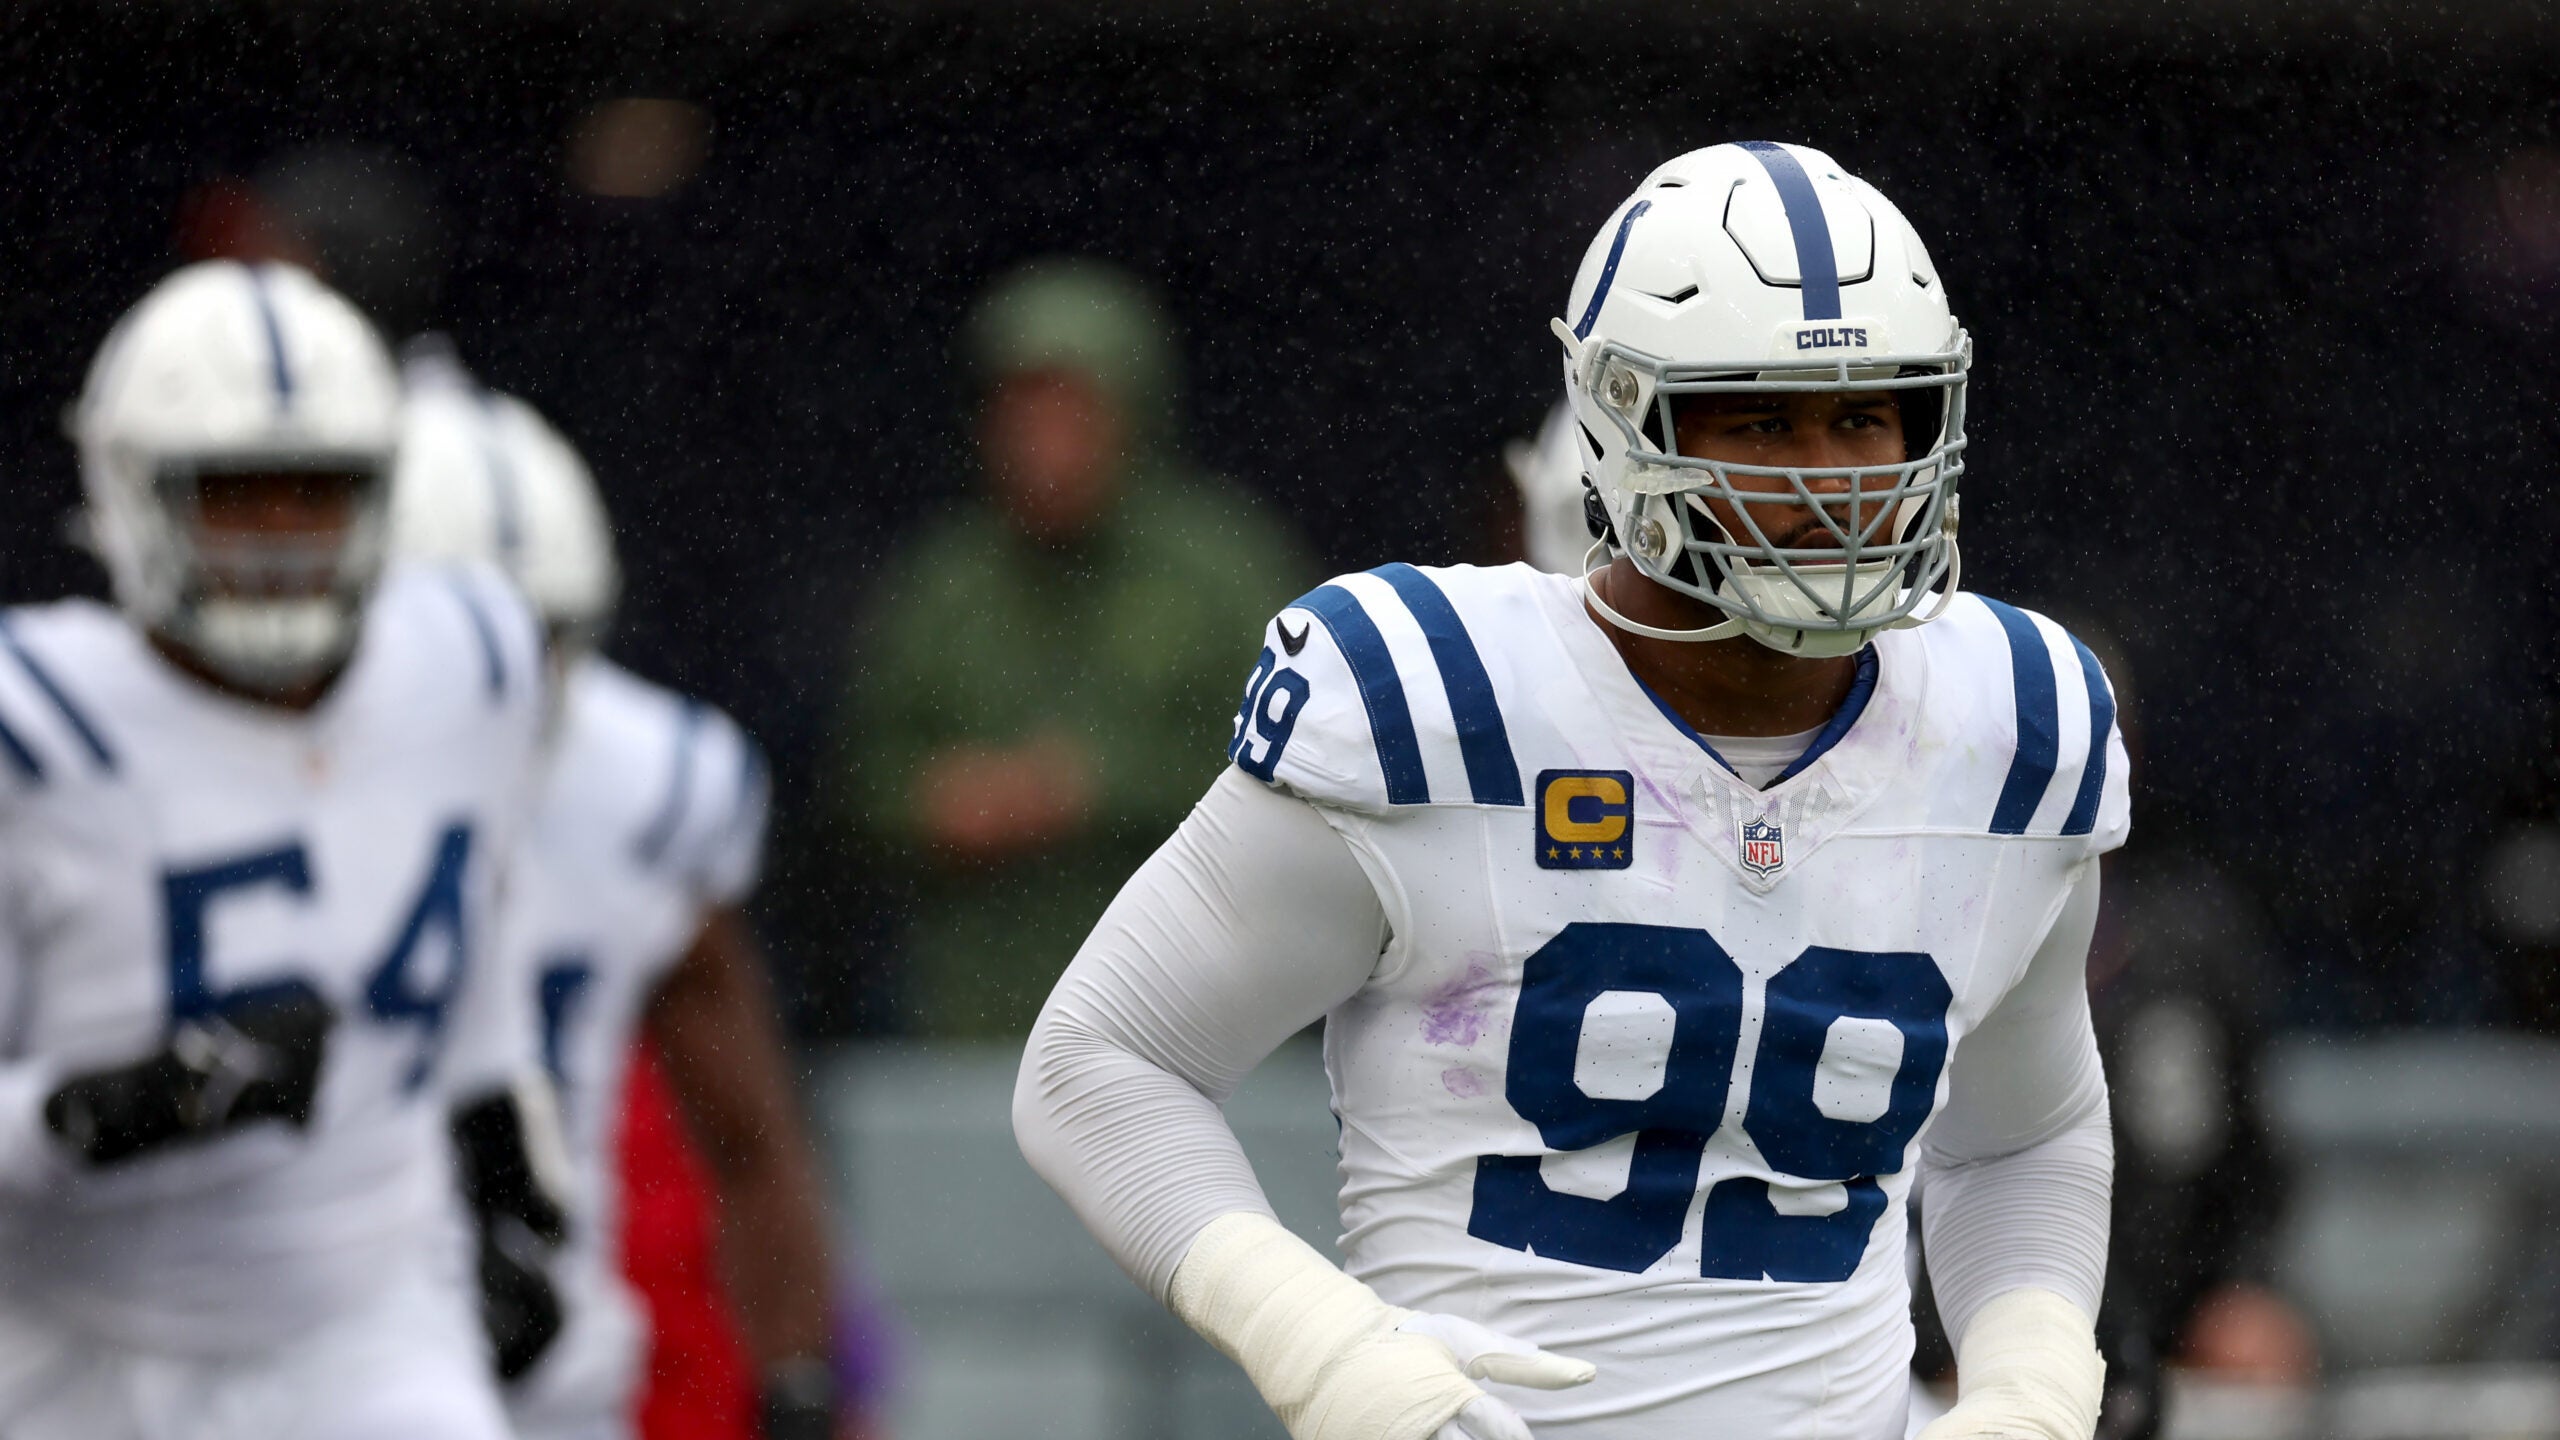 Defensive tackles Aaron Donald, DeForest Buckner to square off again in  Rams-Colts game - WISH-TV, Indianapolis News, Indiana Weather